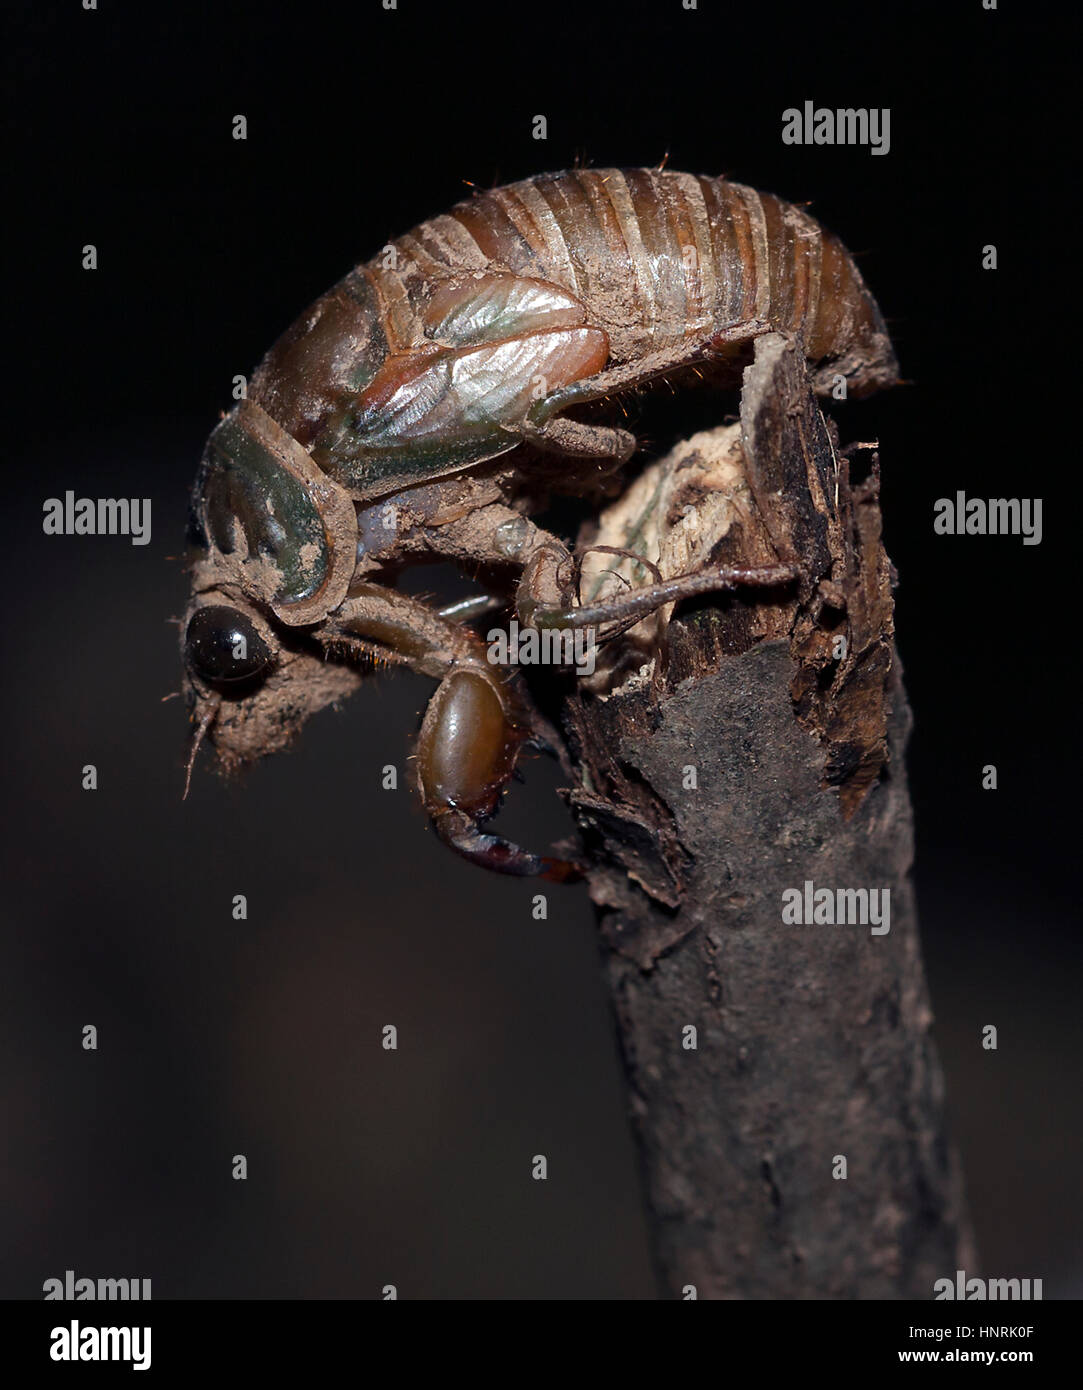 I found this Cicada after it emerged from underground. It was starting it's last stage of life to break free of it's shell casing. Nature wonder! Stock Photo